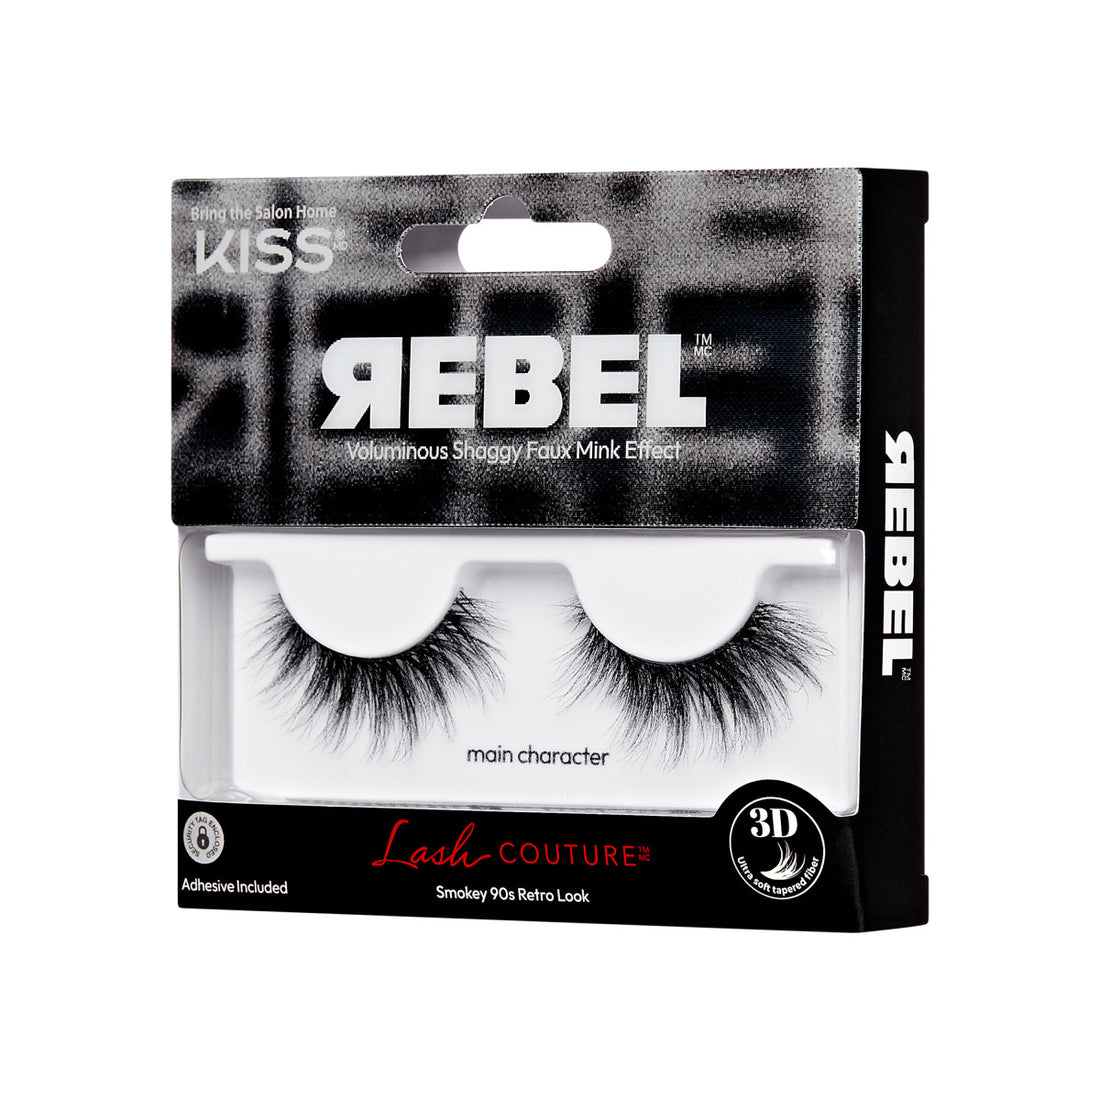 KISS Lash Couture Rebel Collection – main character